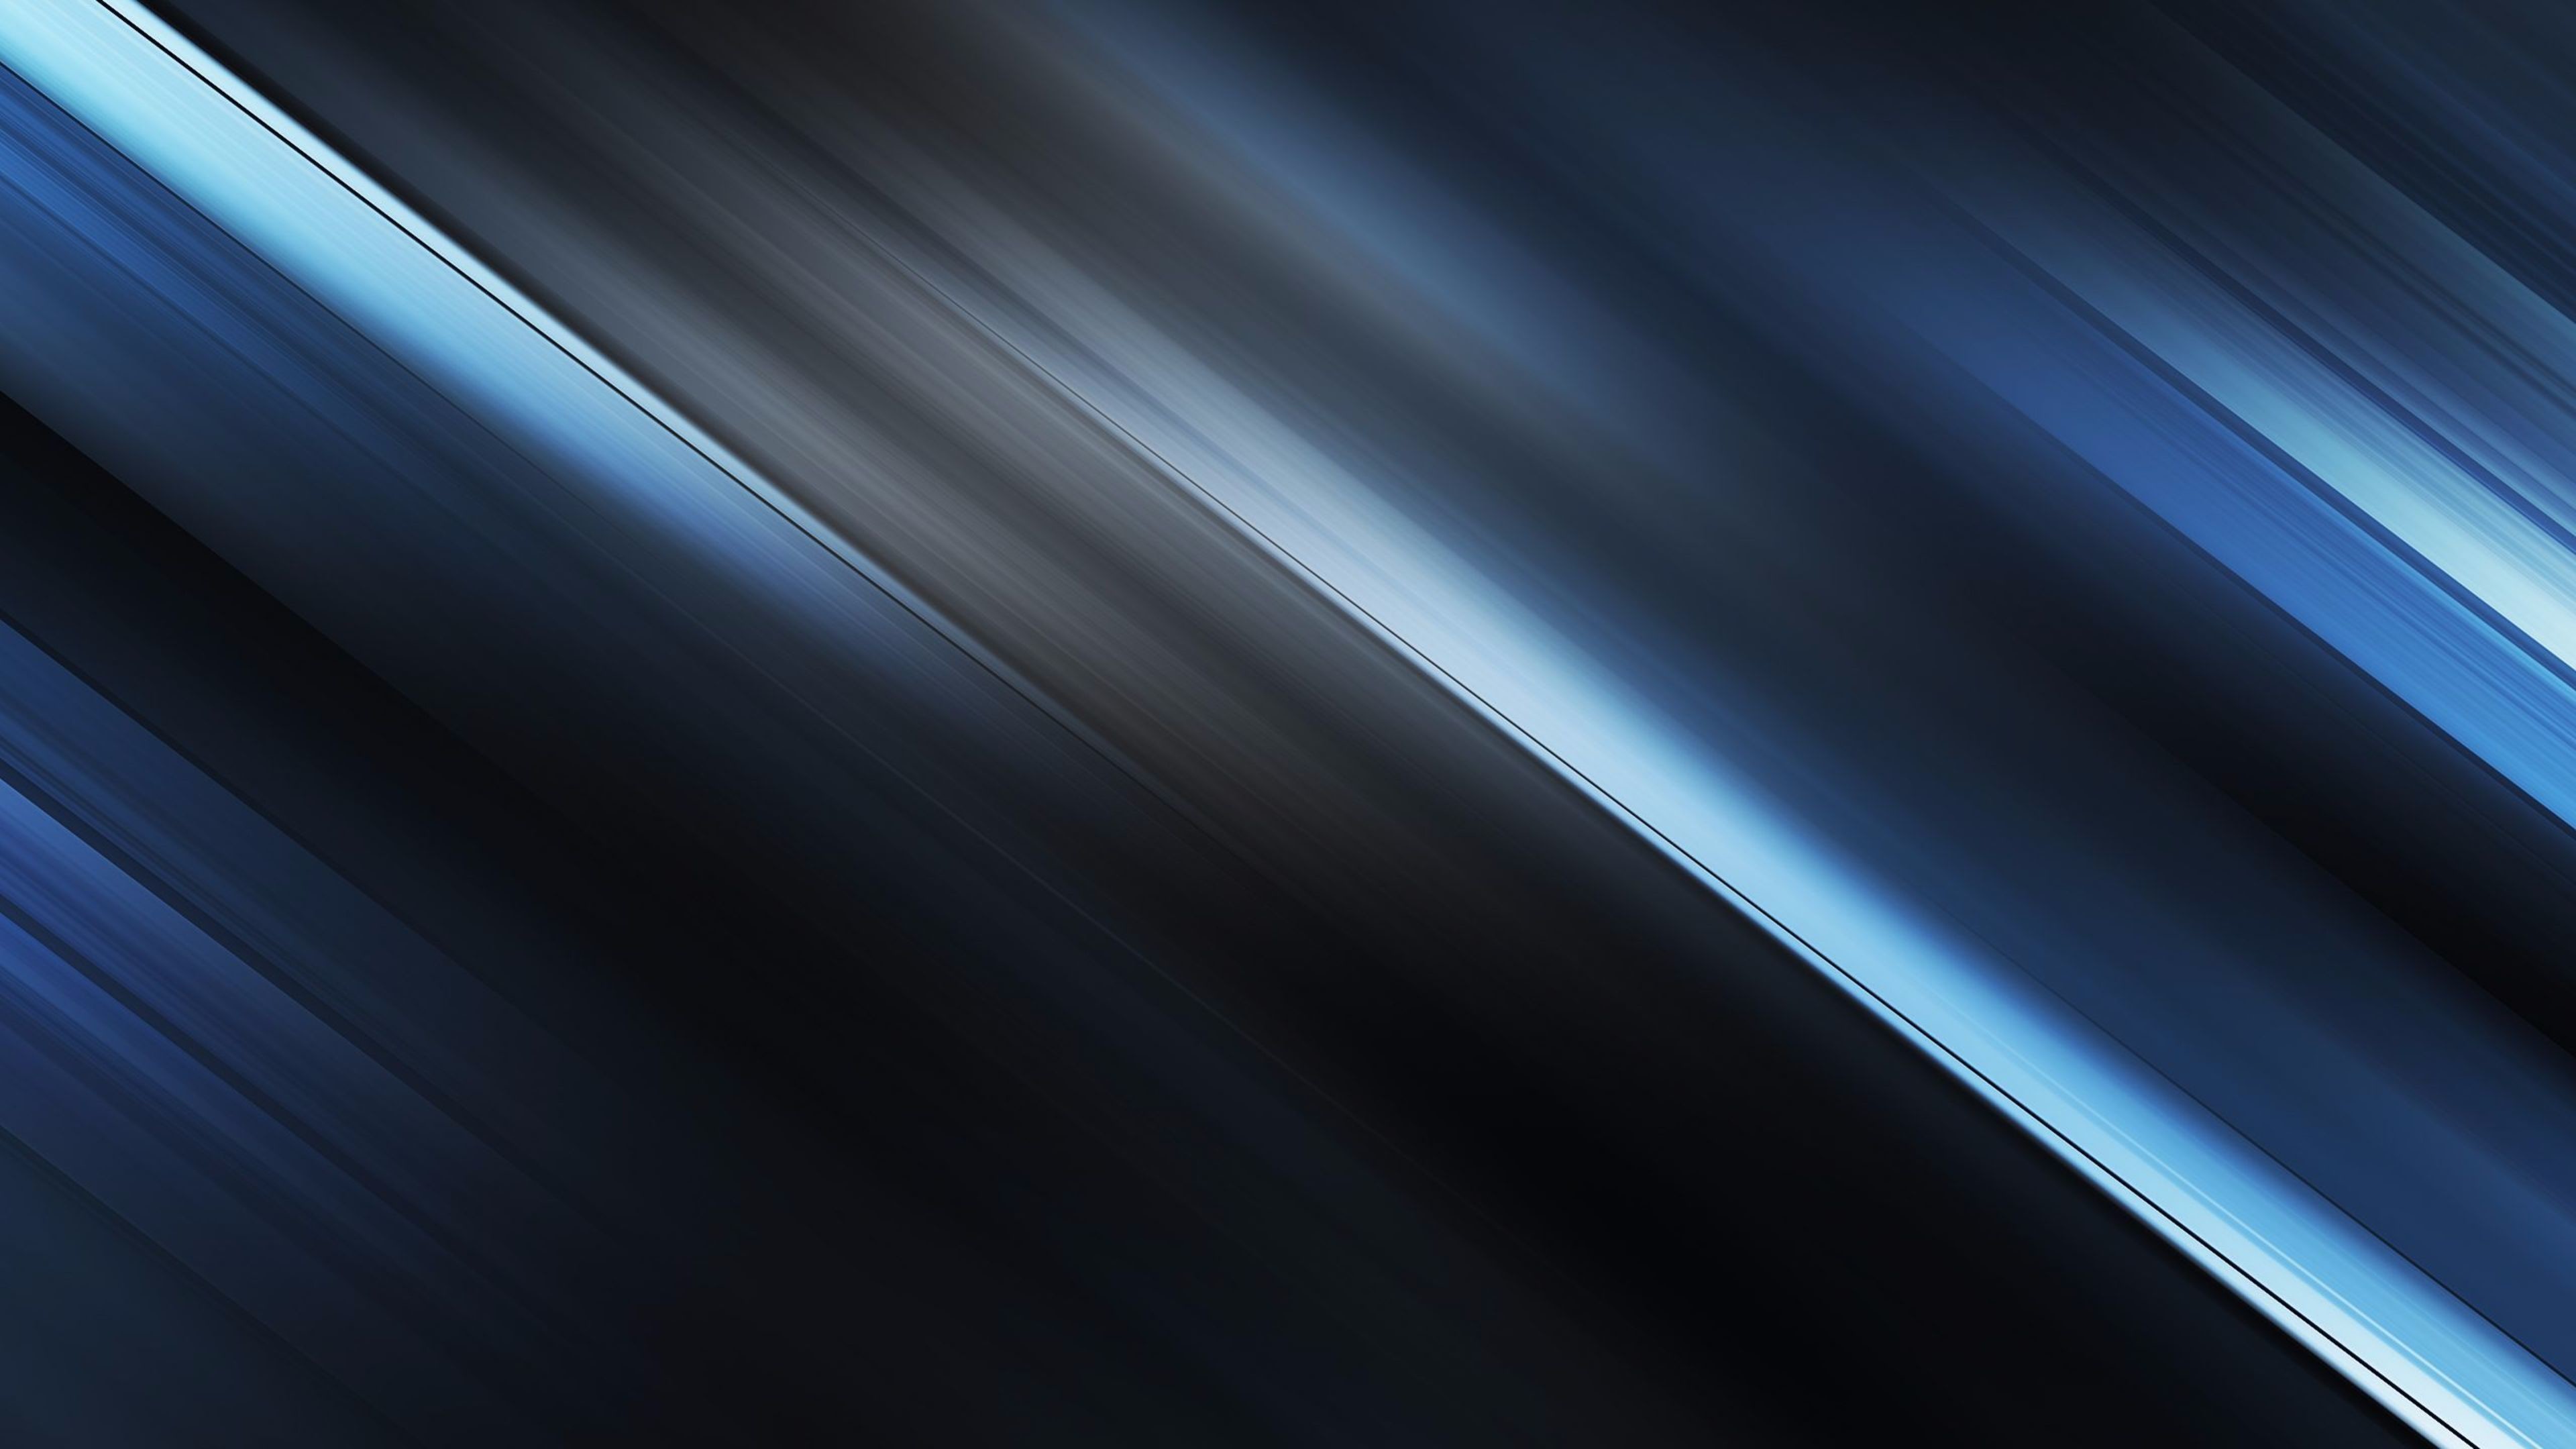 Black And Blue Abstract Wallpaper (62+ Images)